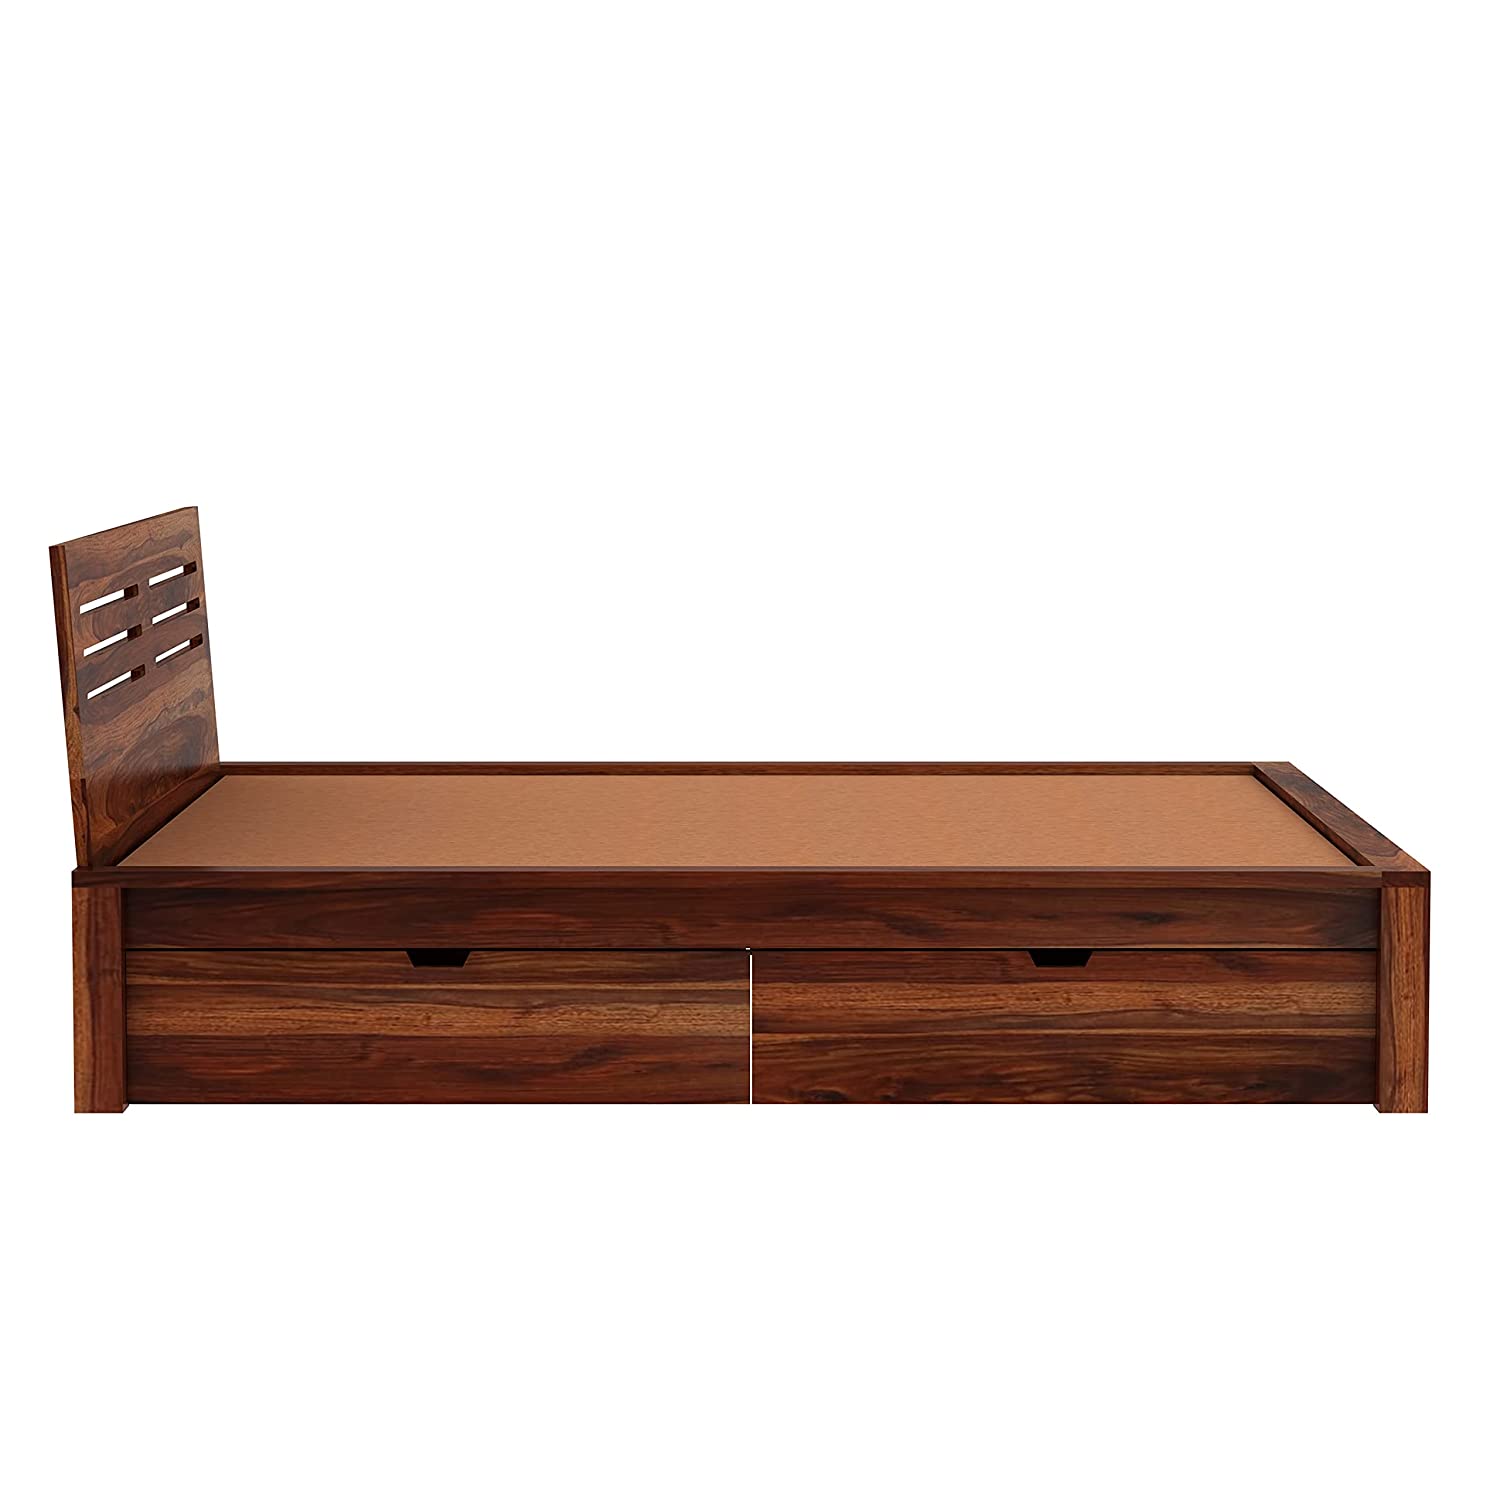 Due Solid Sheesham Wood Bed With Four Drawers (King Size, Natural Finish)